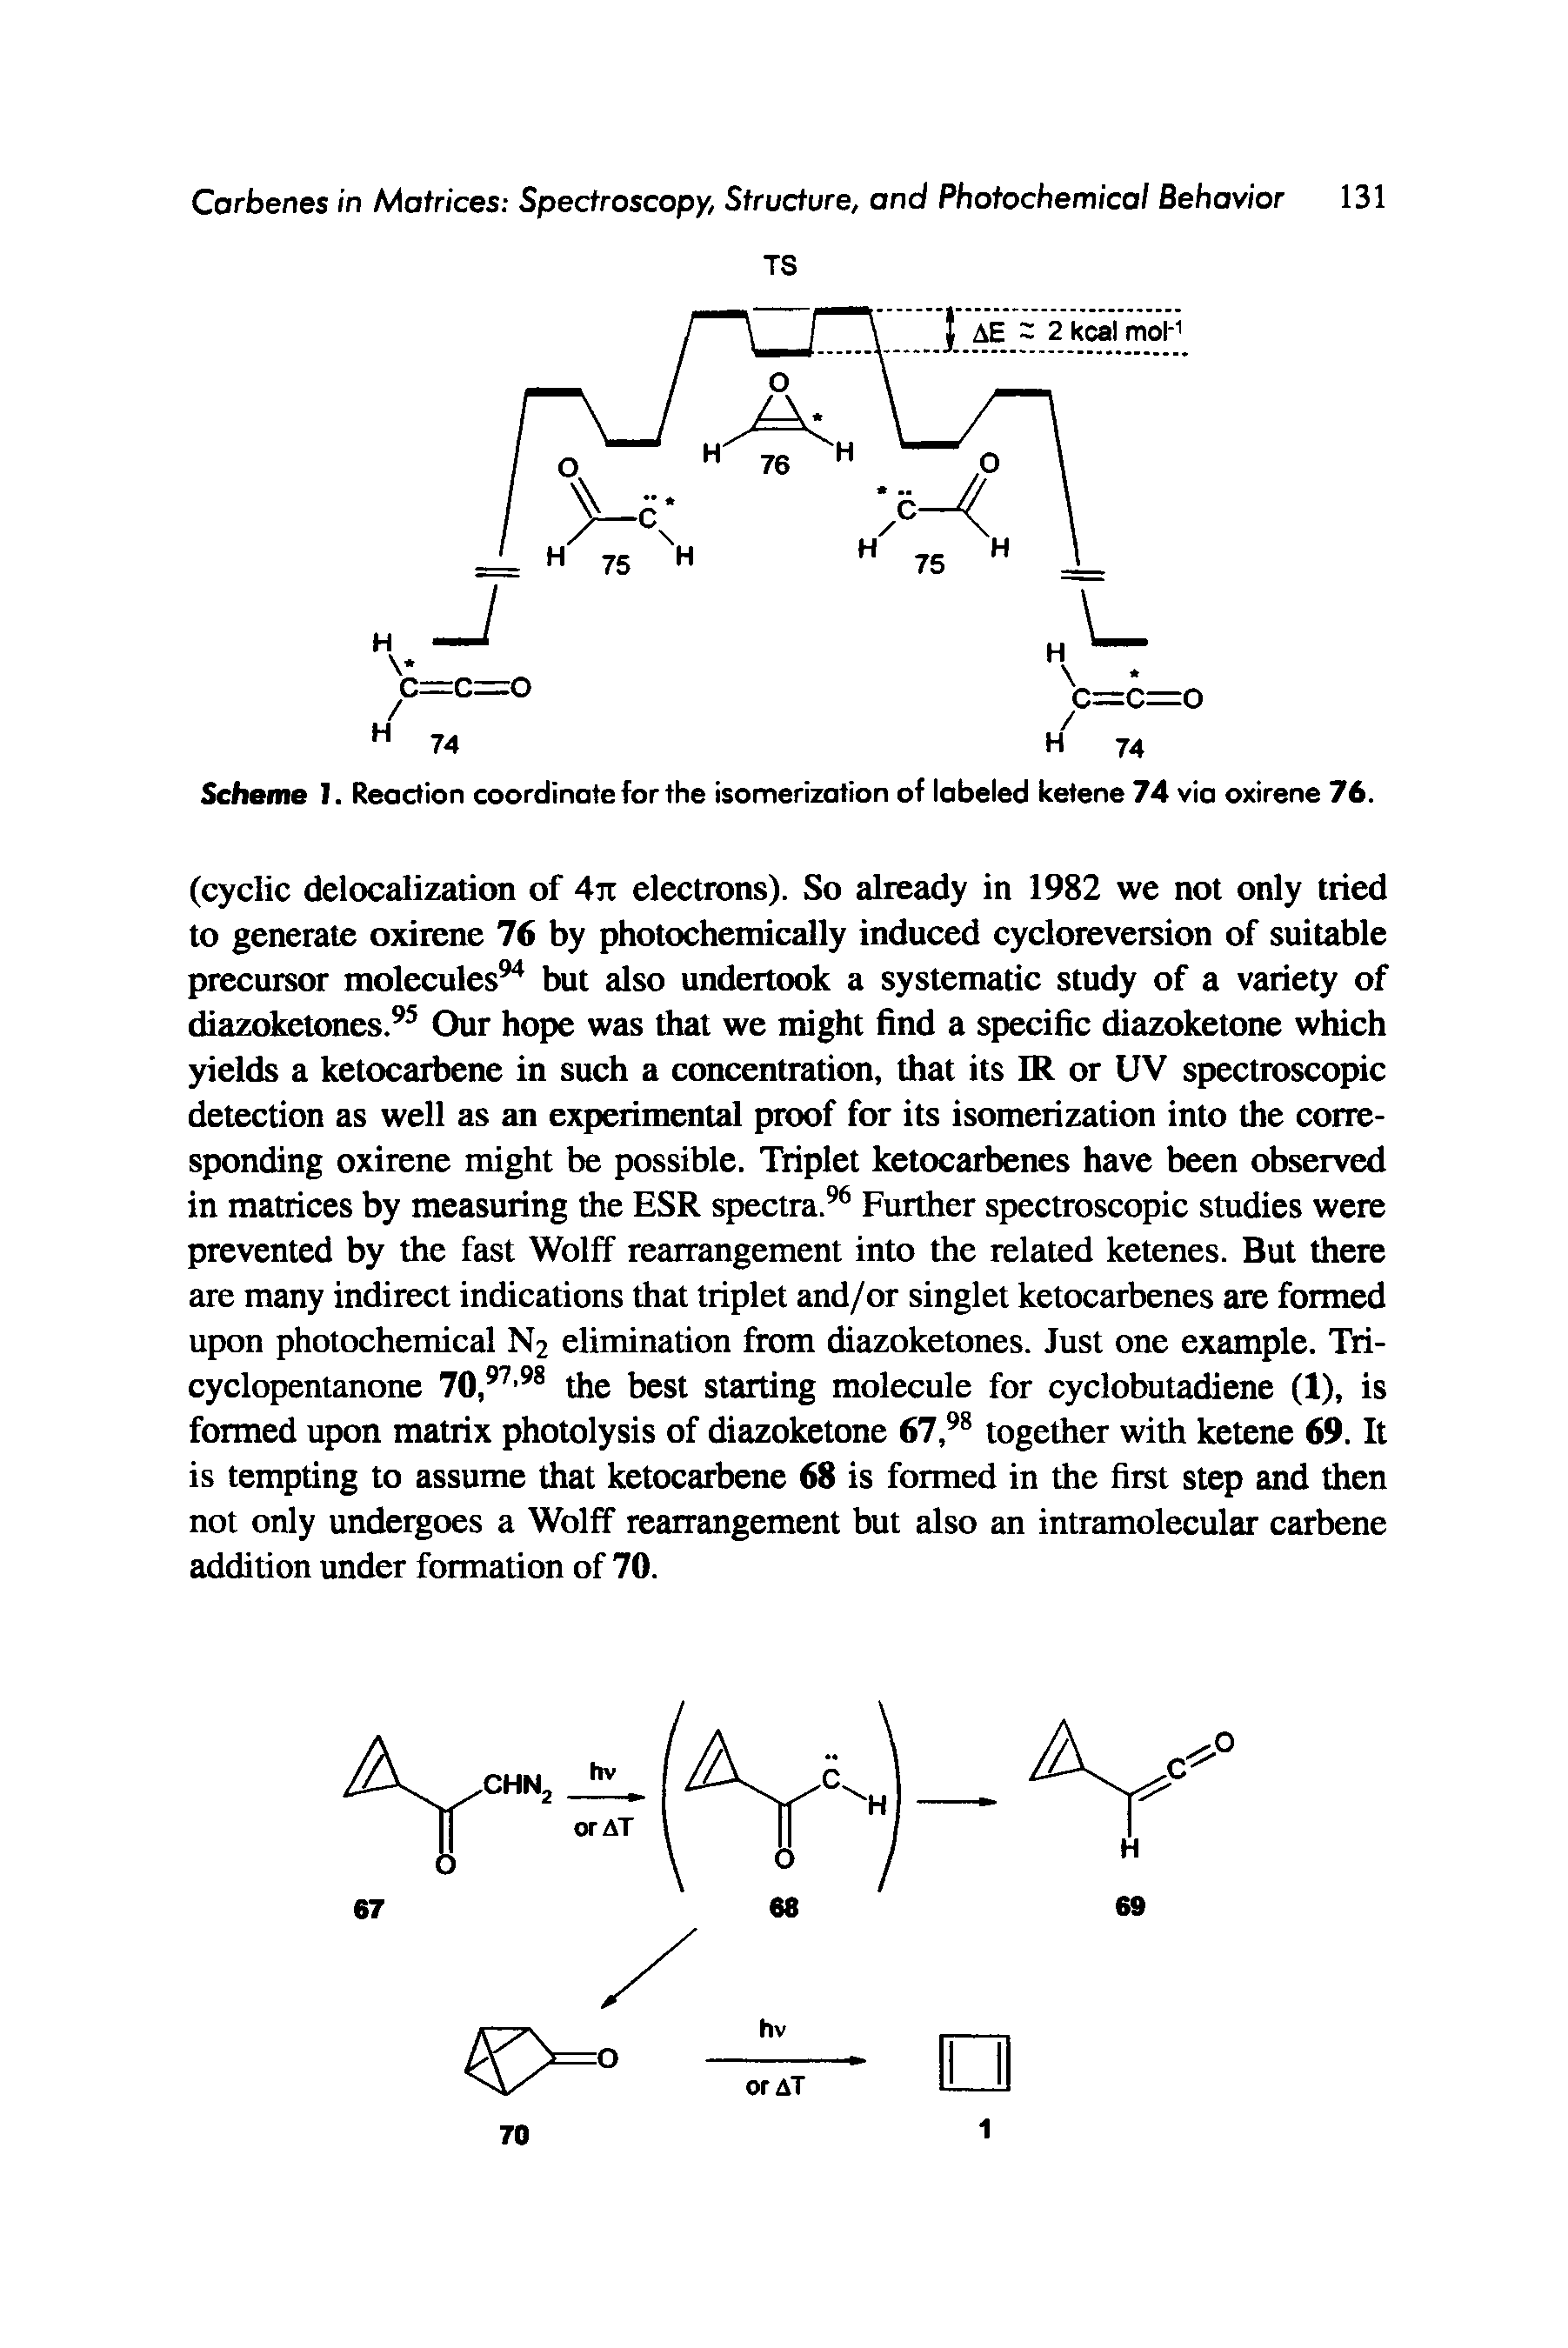 Scheme 1. Reaction coordinate for the isomerization of labeled ketene 74 vio oxirene 76.